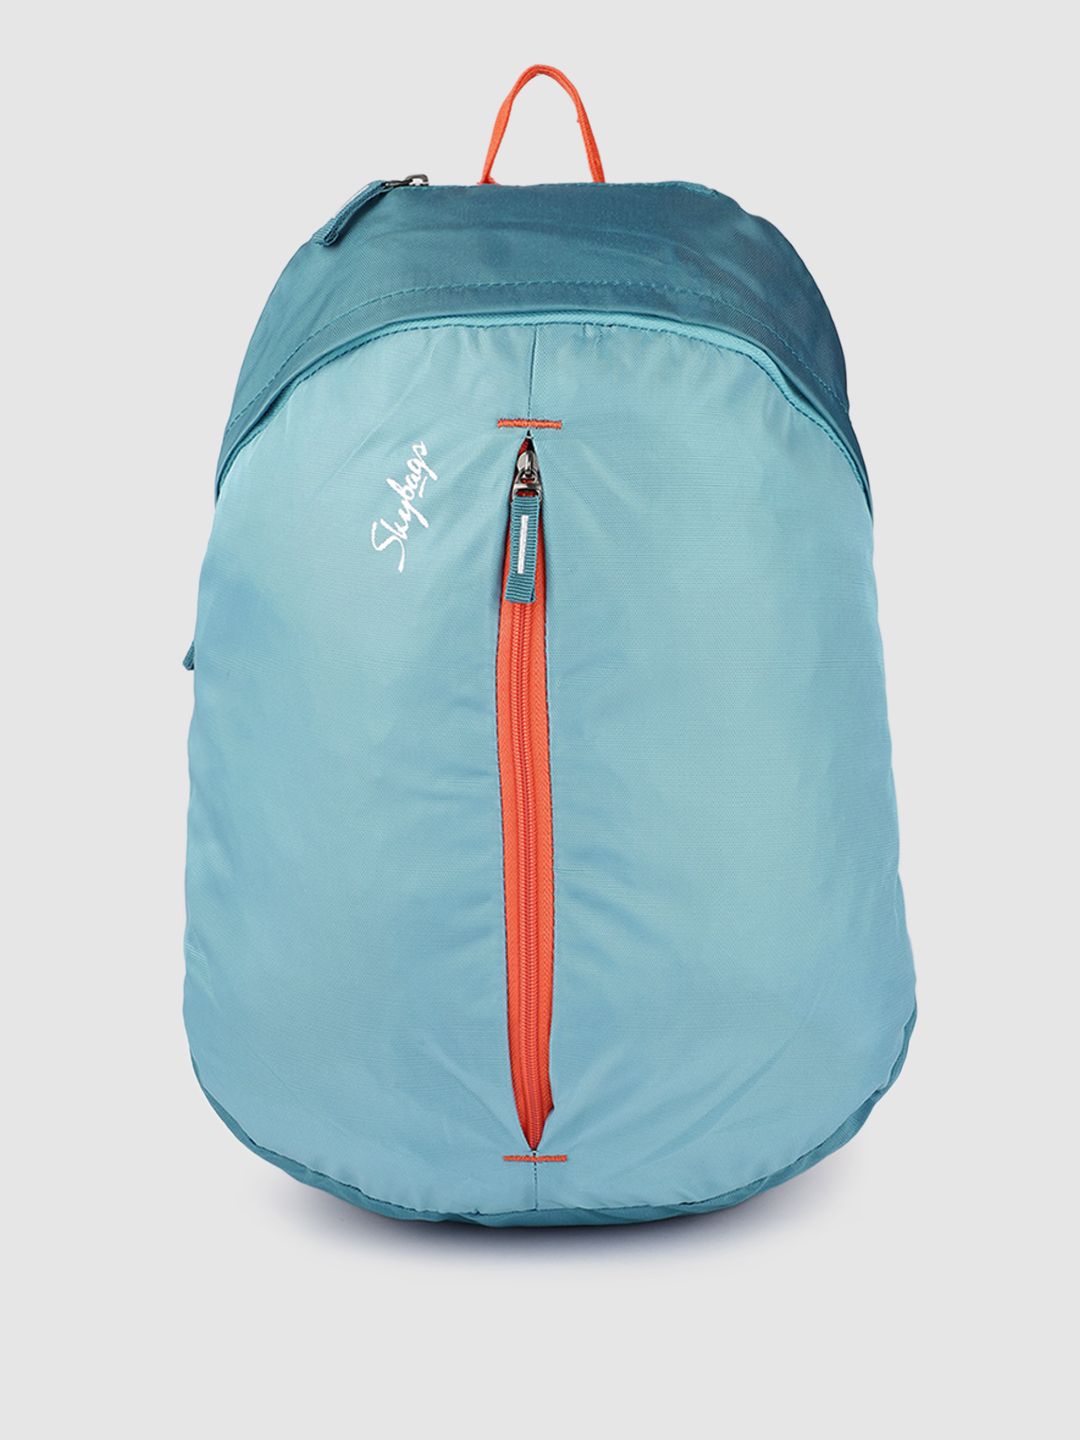 Skybags Unisex Blue Solid Backpack Price in India